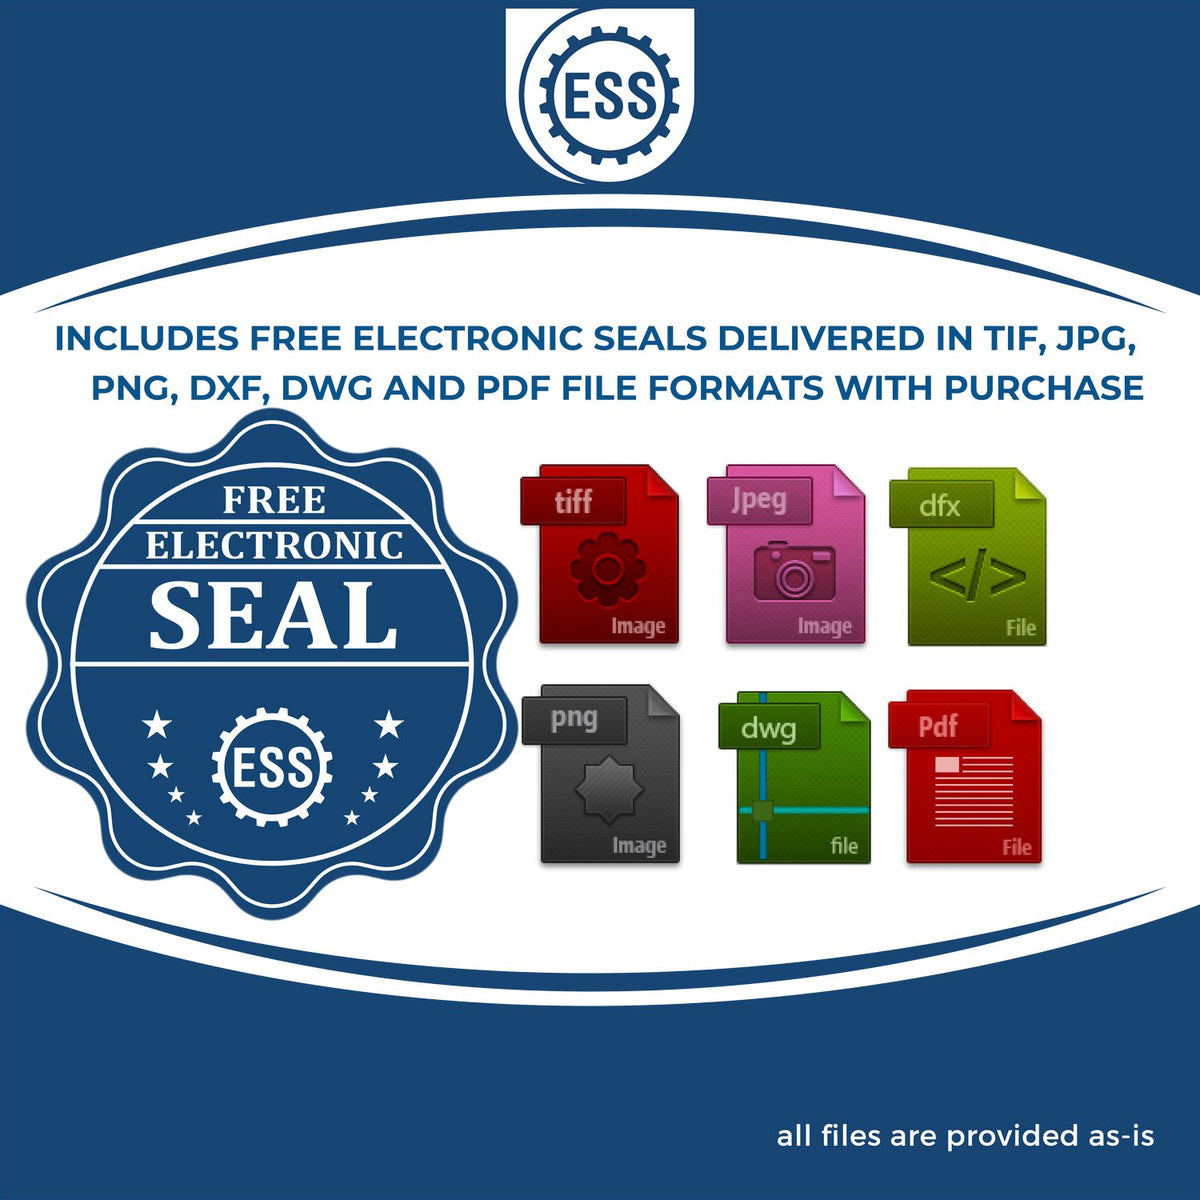 An infographic for the free electronic seal for the Guam Professional Geologist Seal Stamp illustrating the different file type icons such as DXF, DWG, TIF, JPG and PNG.